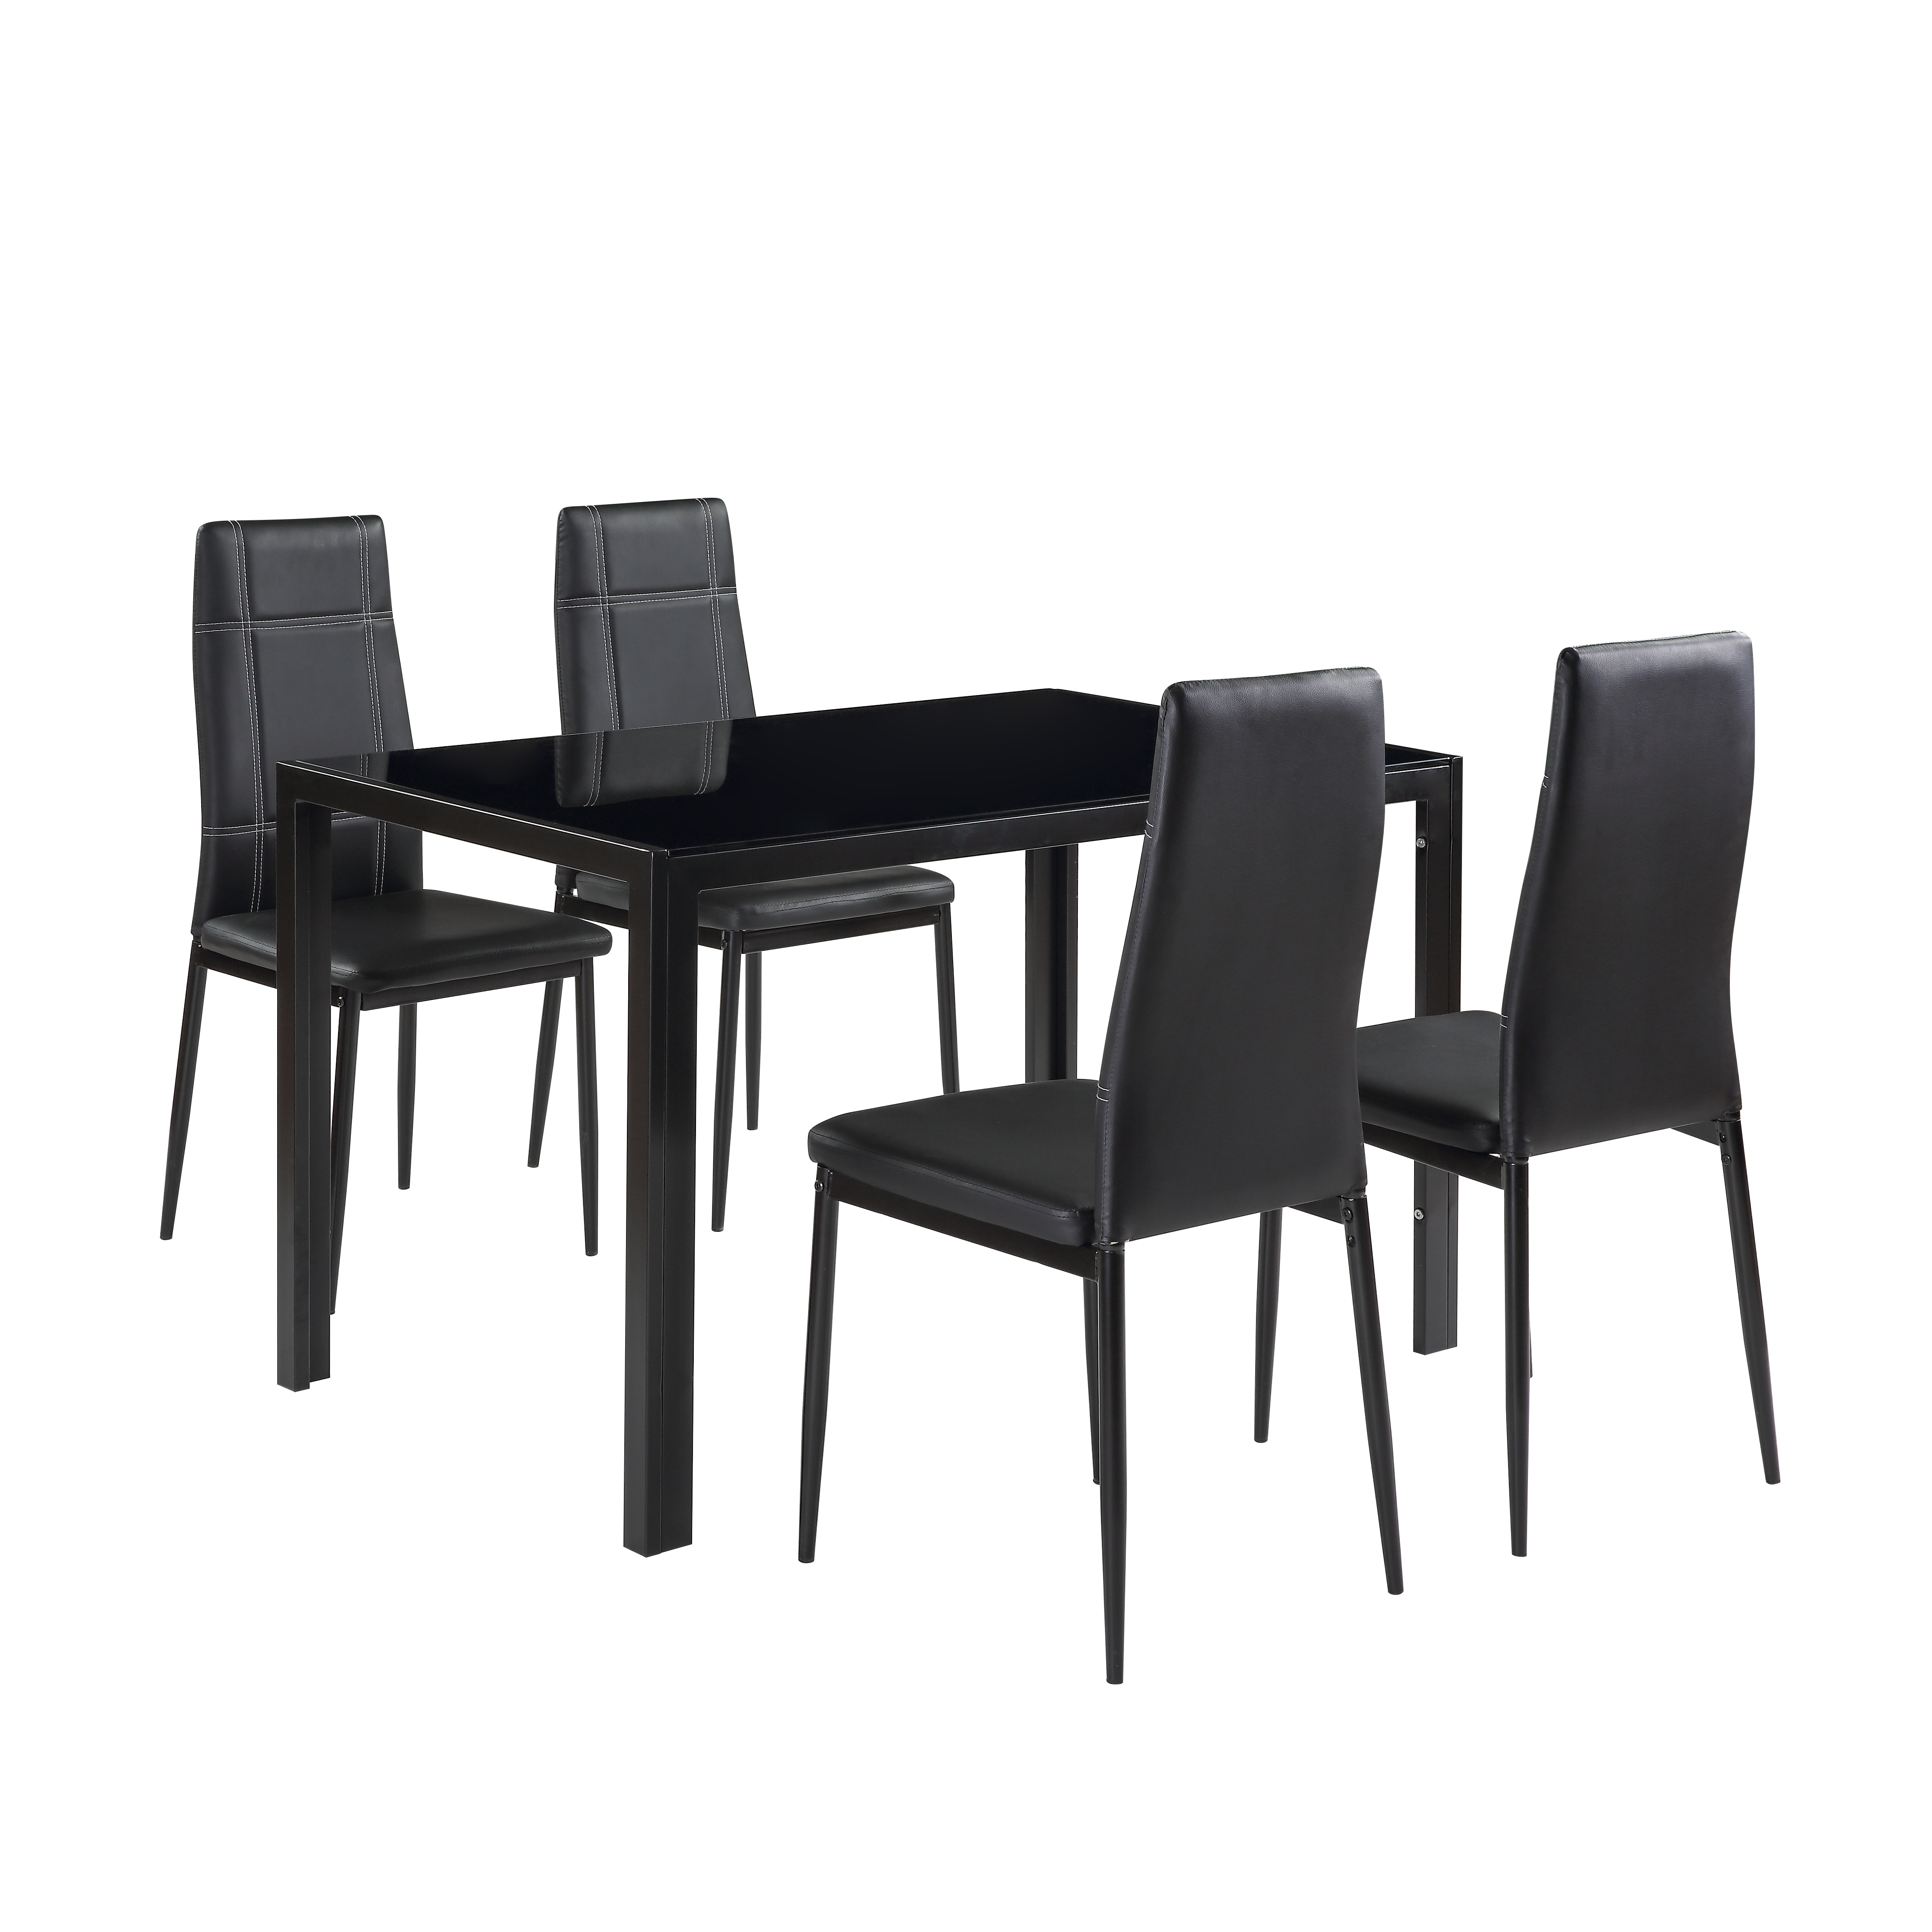 Dining Table Set 5 Piece Tempered Glass Table and 4pcs Faux Leather Dinning Chairs US Warehouse